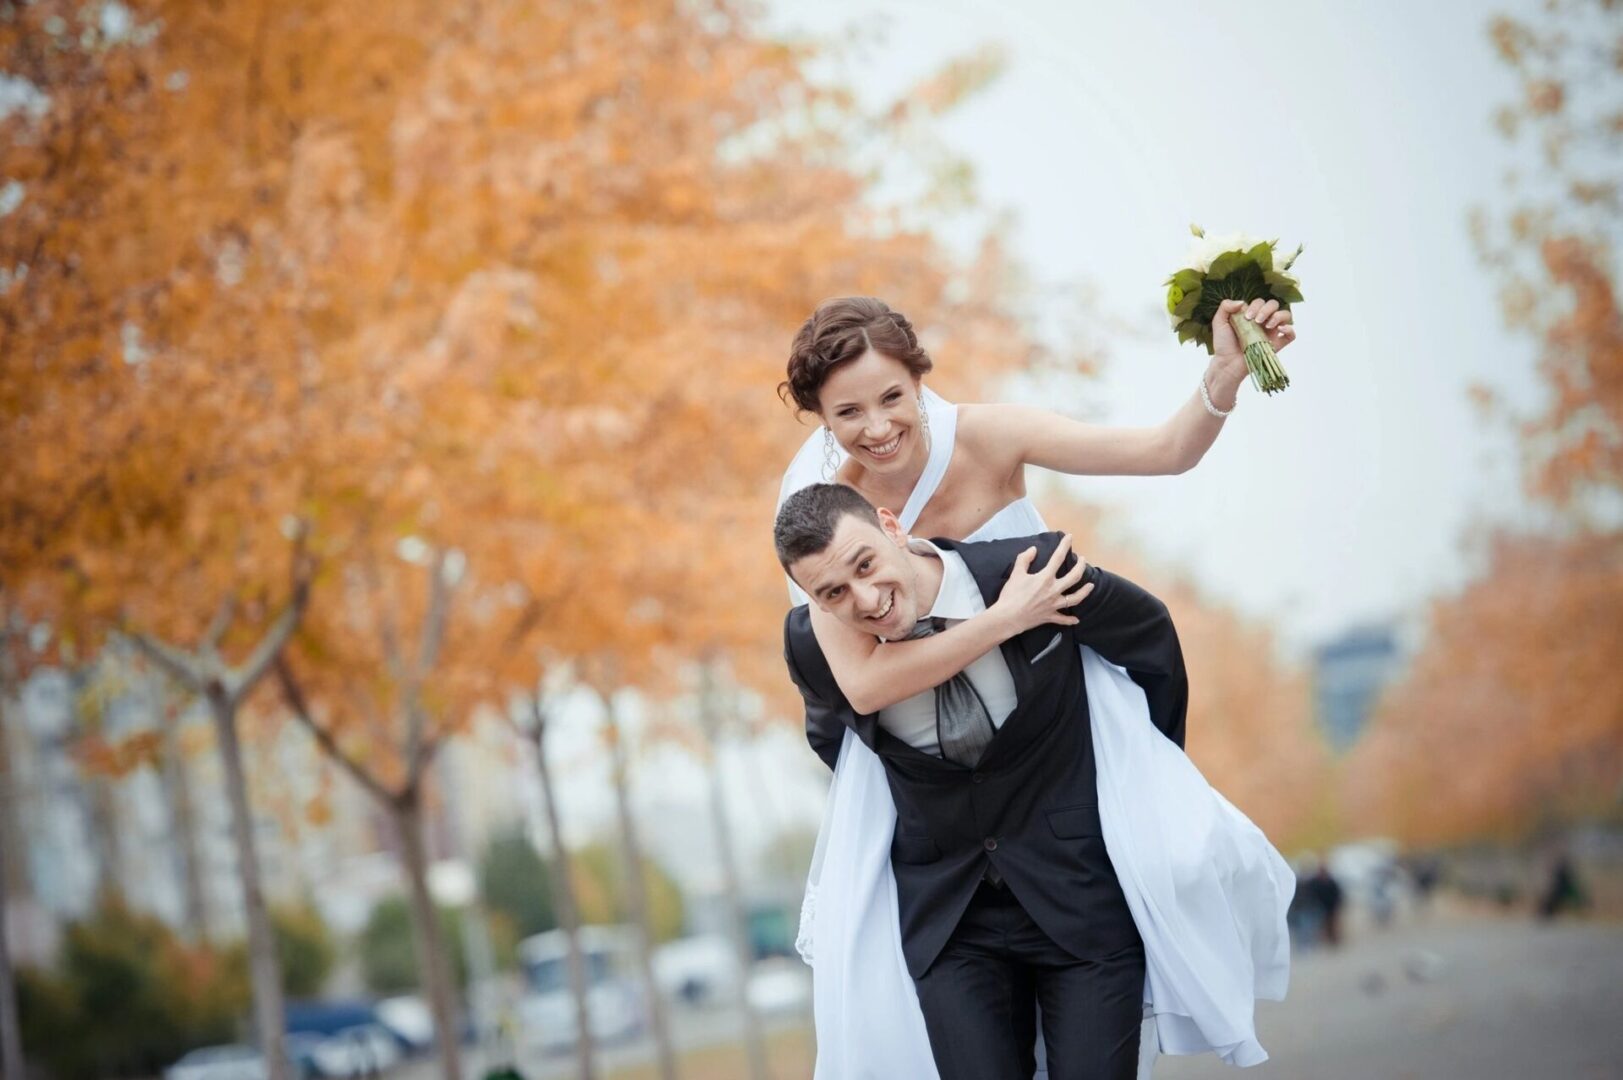 a groom carrying a bride on his back